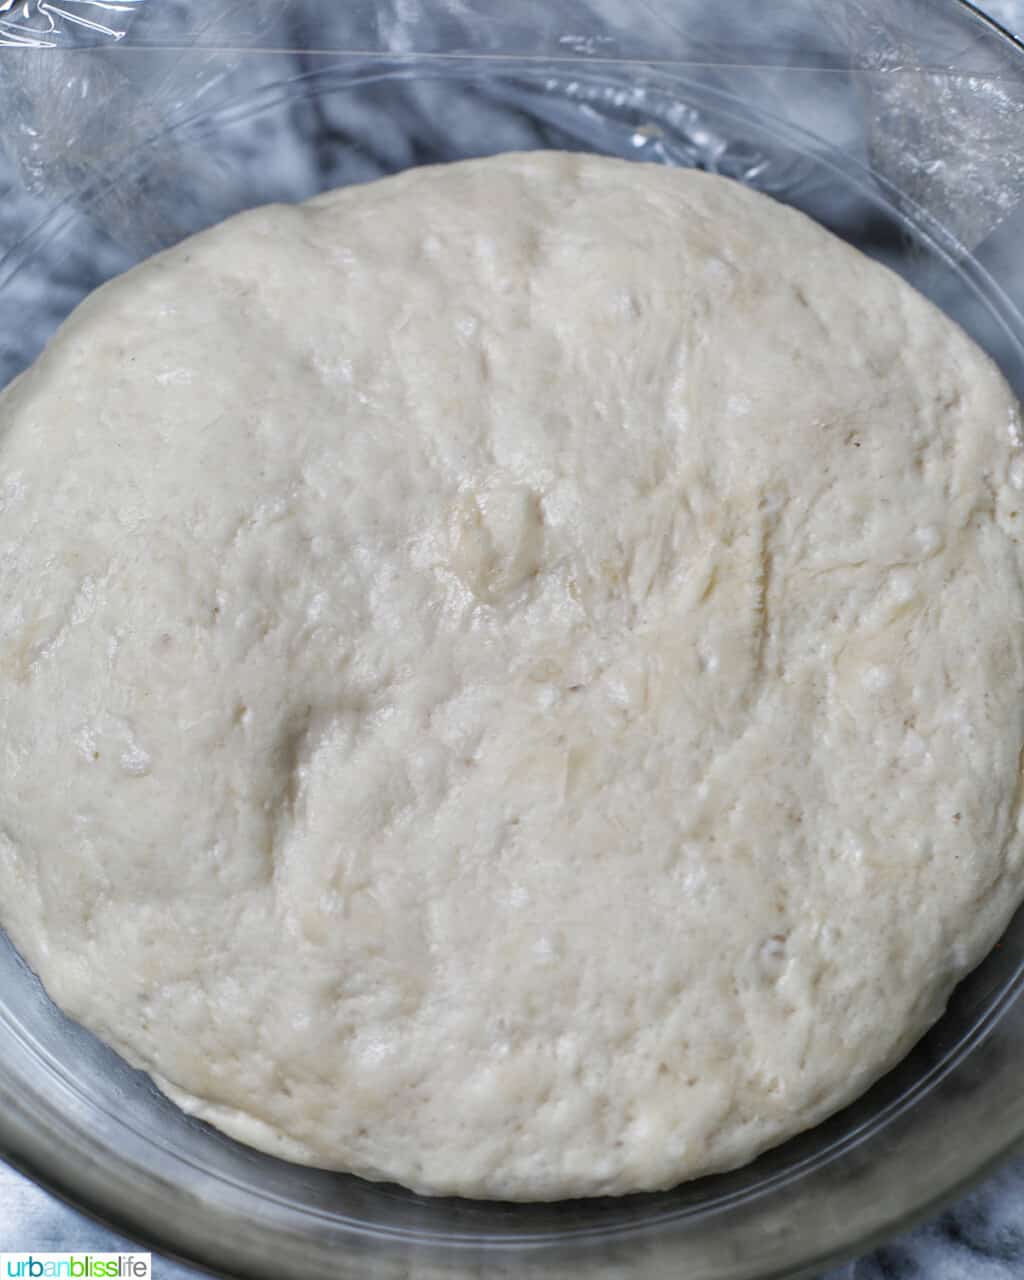 proofed dough in bowl